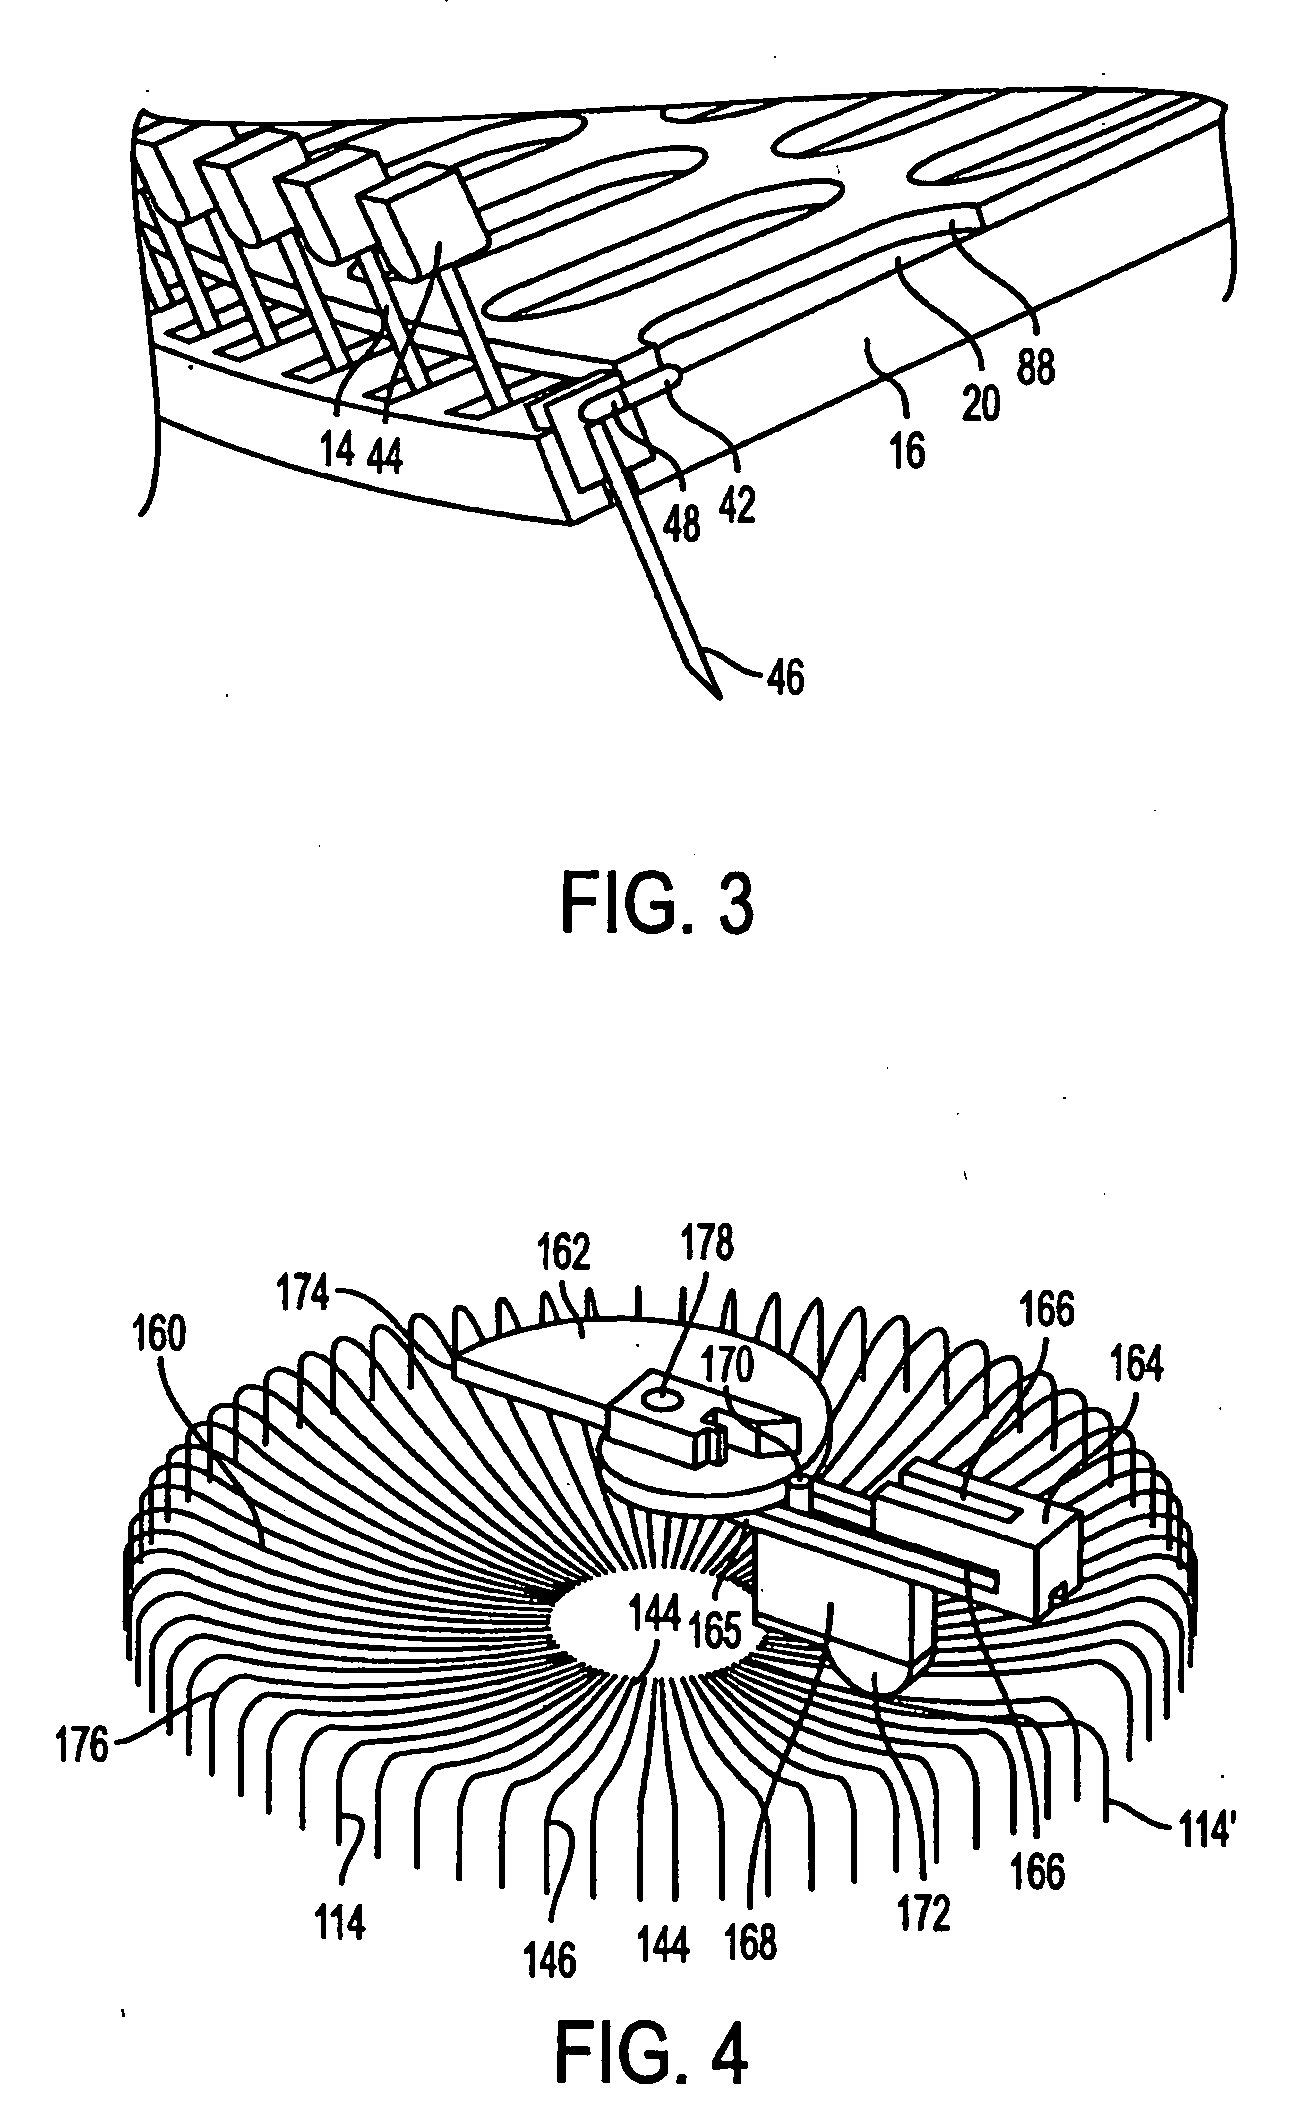 Autonomous, ambulatory analyte monitor or drug delivery device